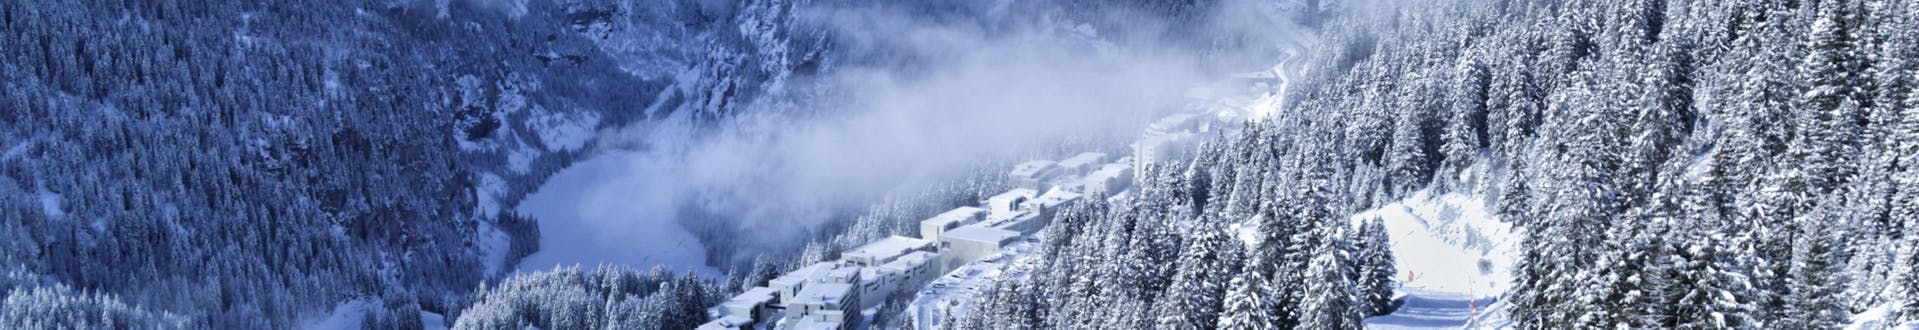 An image of the white winter landscape encountered in the ski resort of Flaine, where local ski schools take their students for their ski lessons.